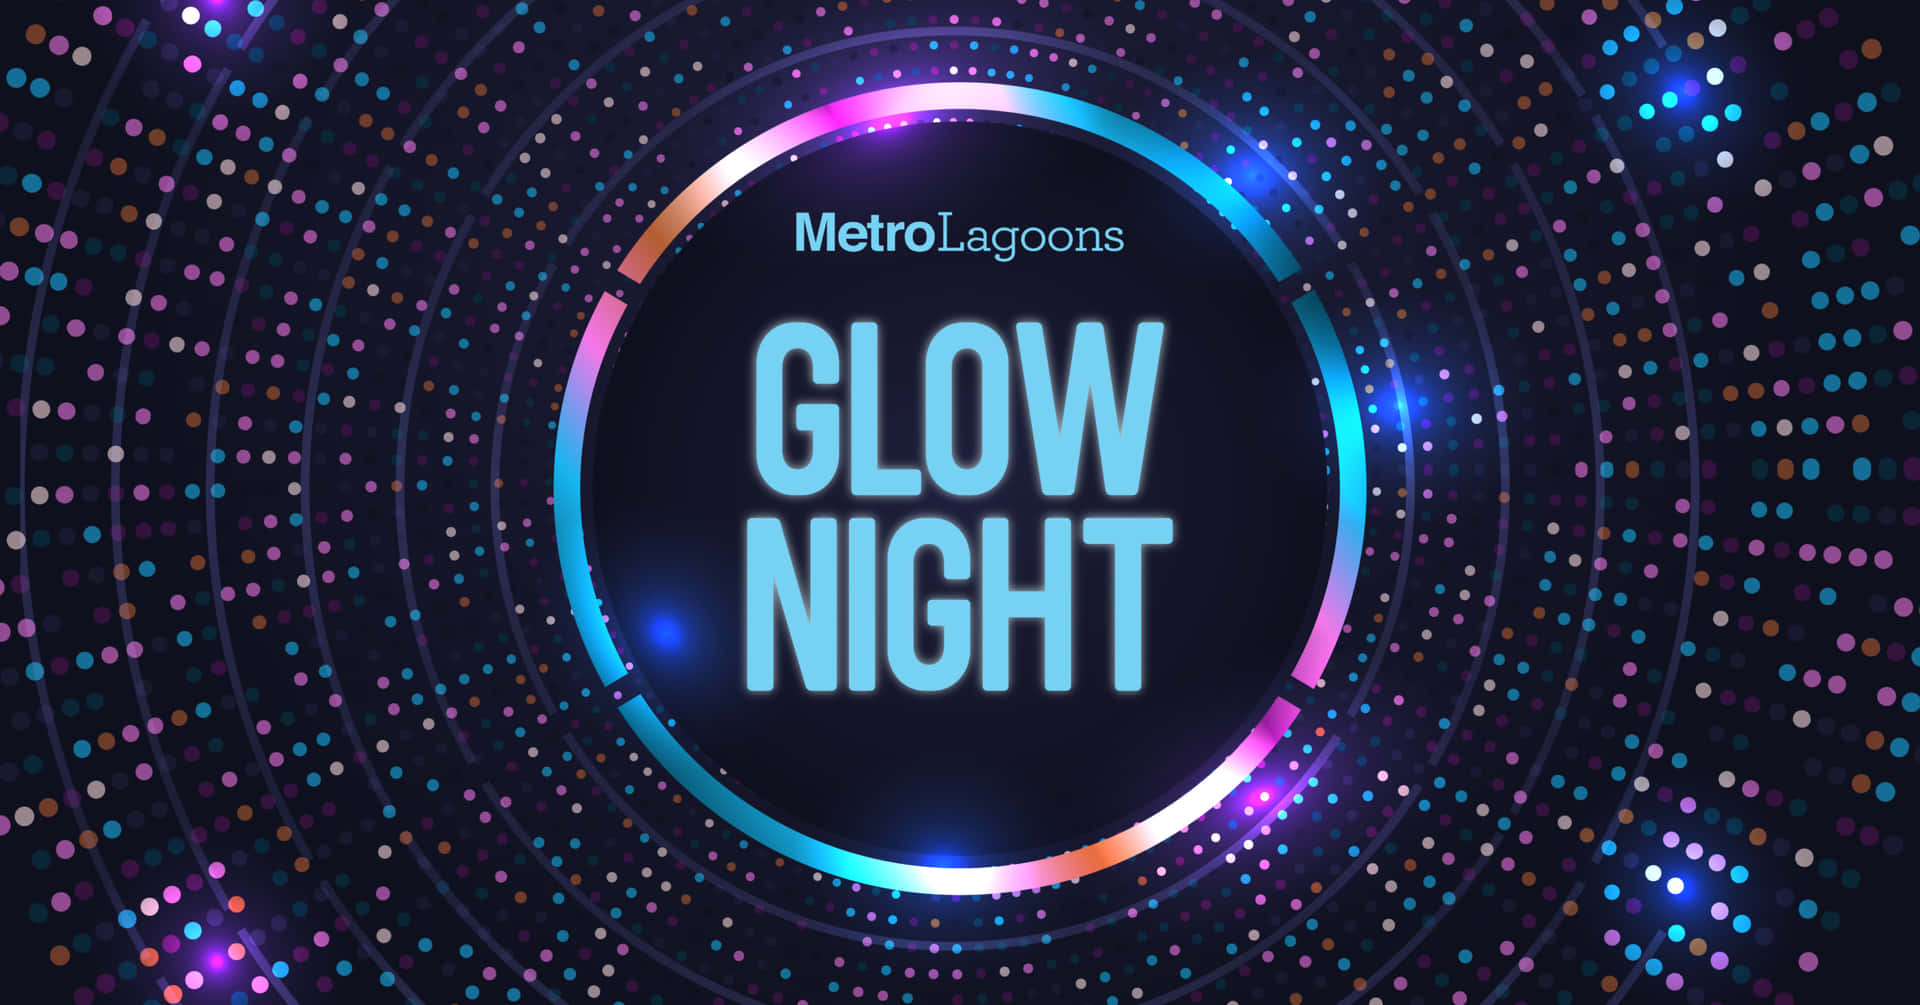 Glow Night - A Dark Background With Colorful Lights